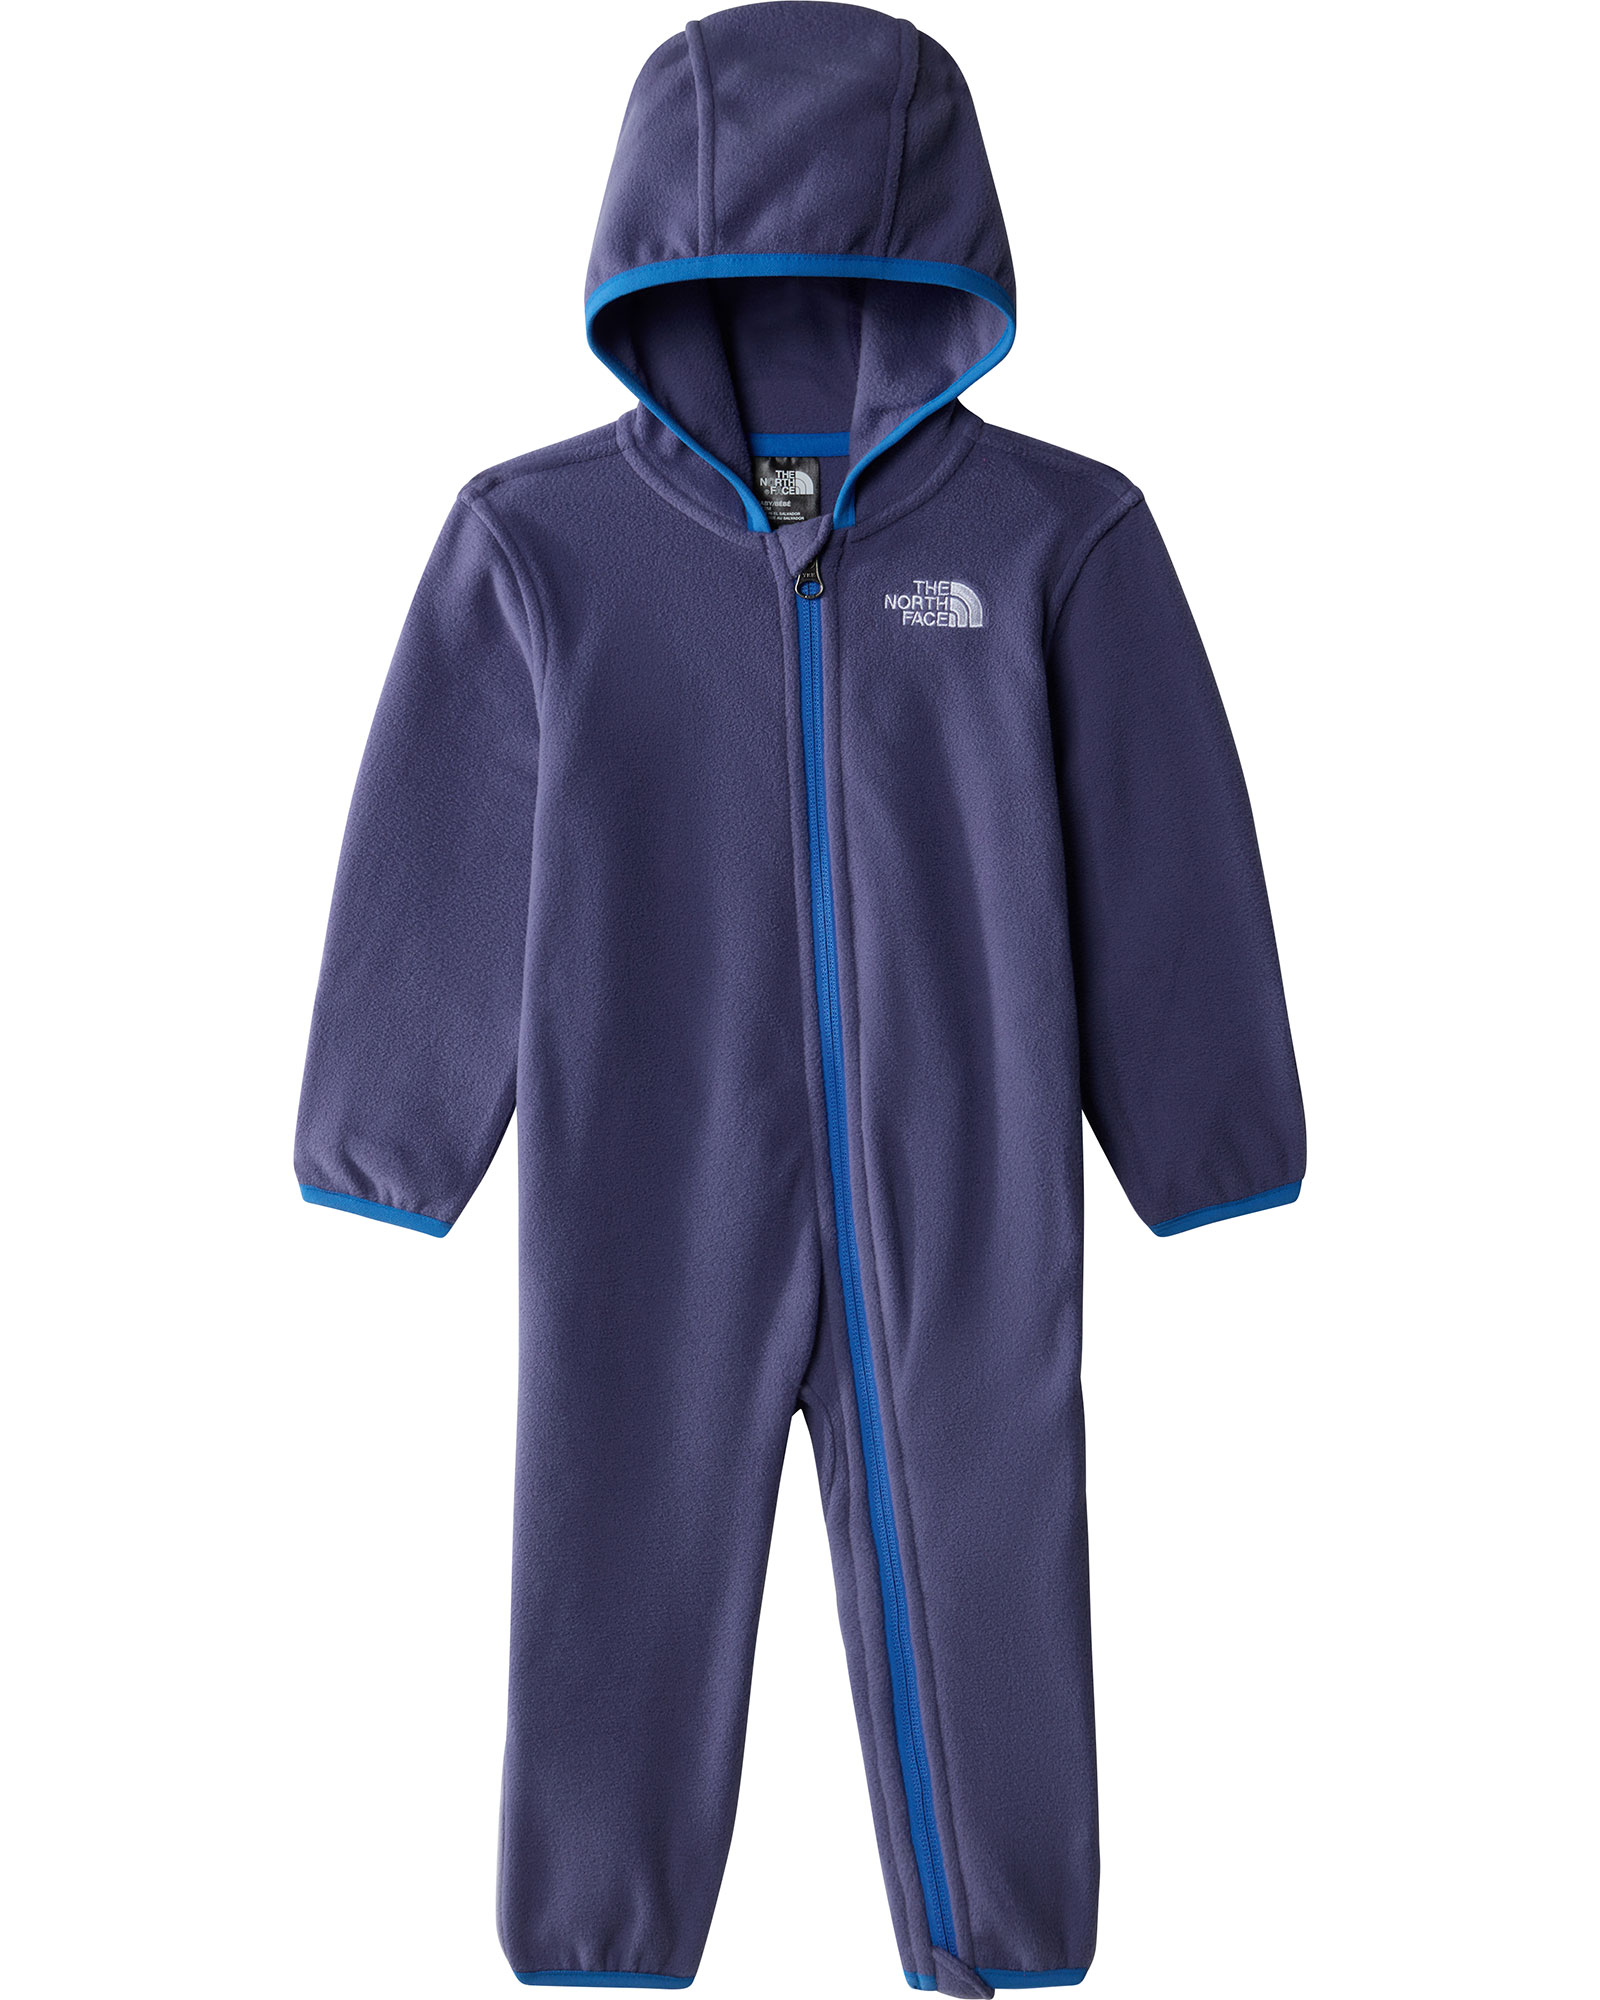 The North Face Baby Glacier One Piece - Cave Blue 6